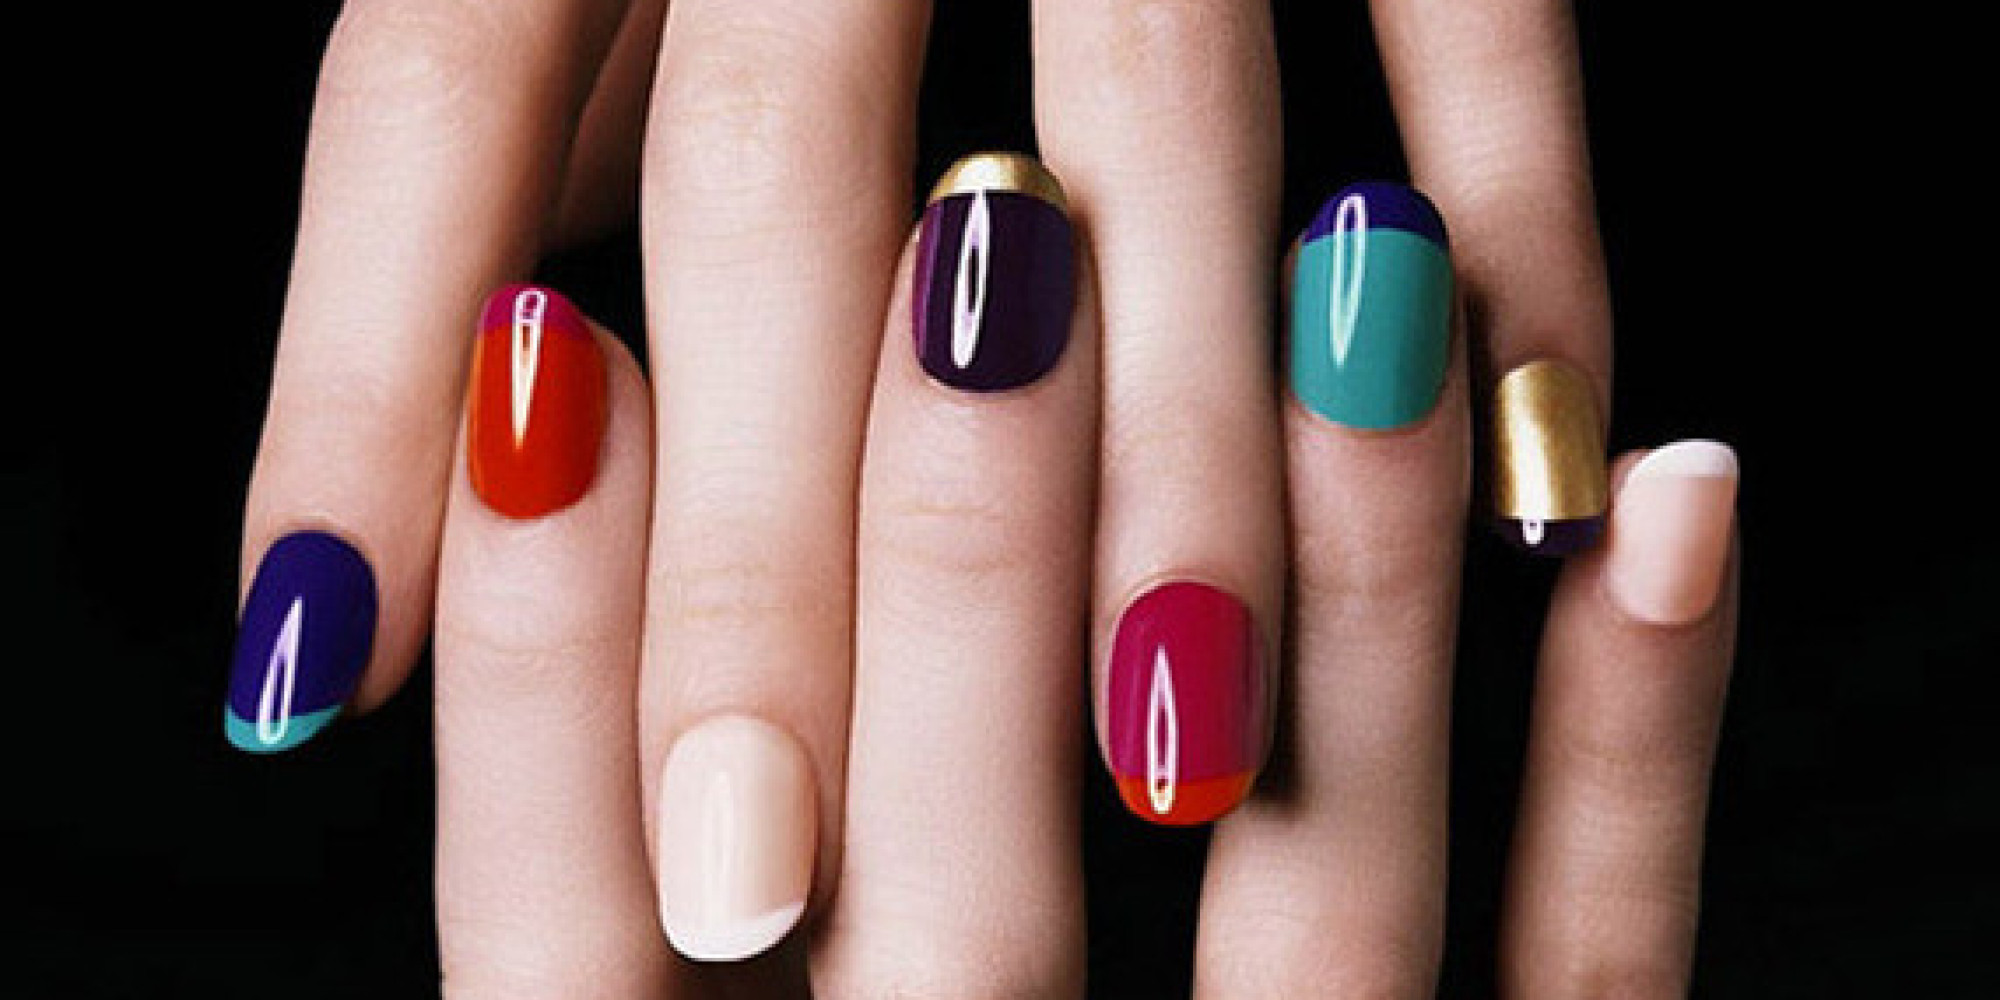 7. Nail Polish Color Test: Tips and Tricks - wide 8